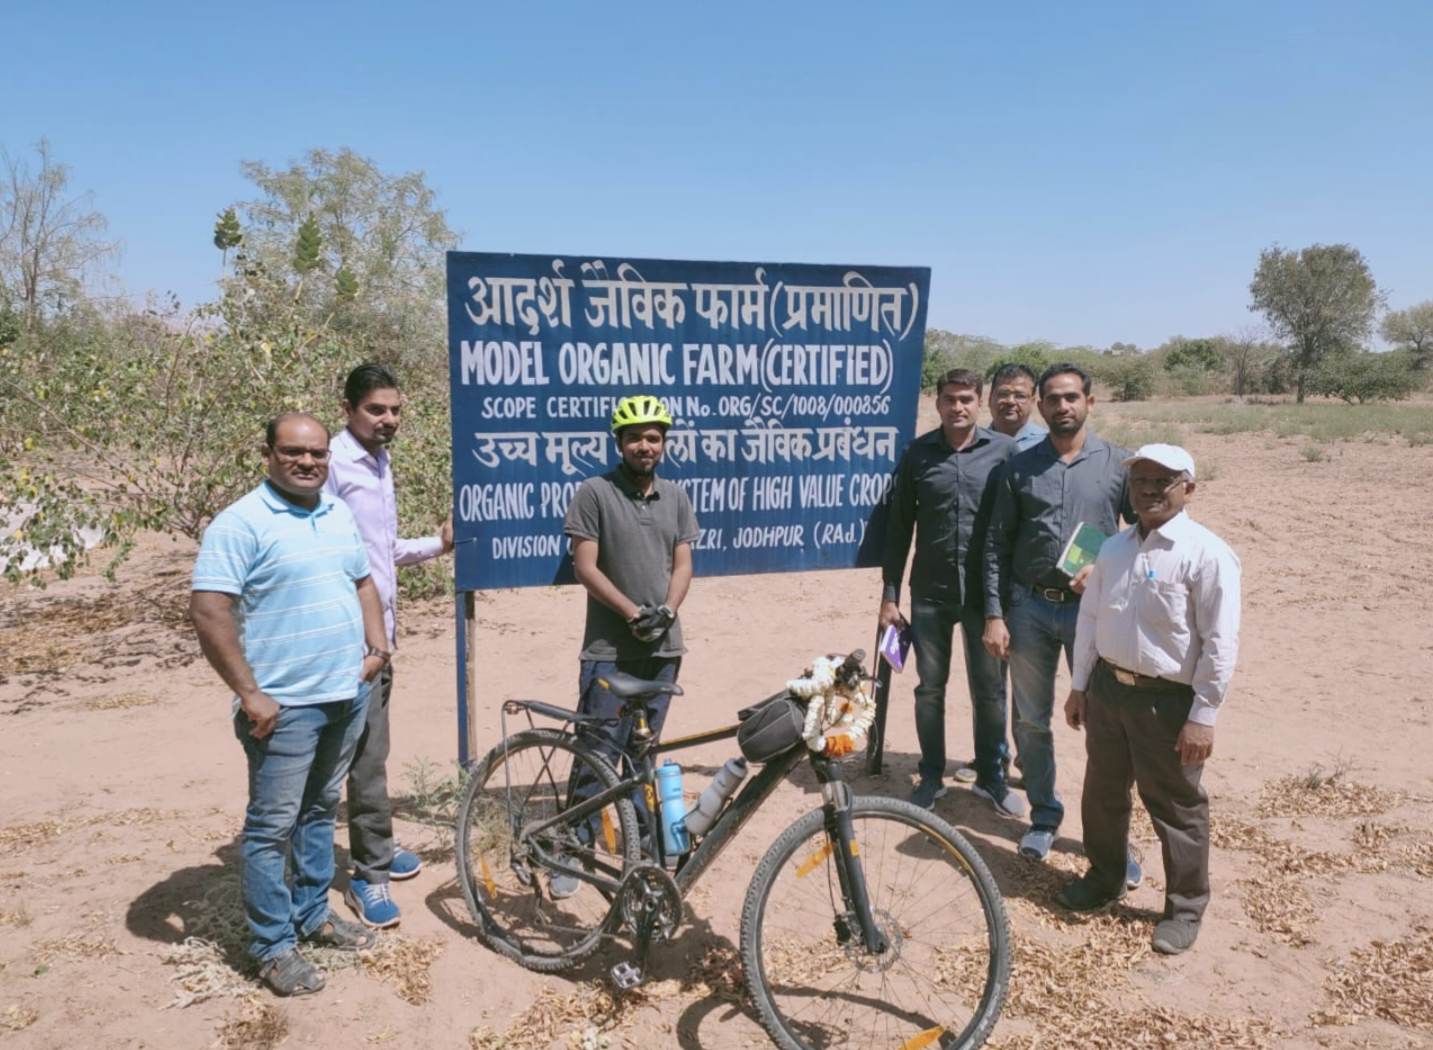 Neeraj Kumar Prajapati – The man on a mission to bring change by cycling 1,11,111 km across India.